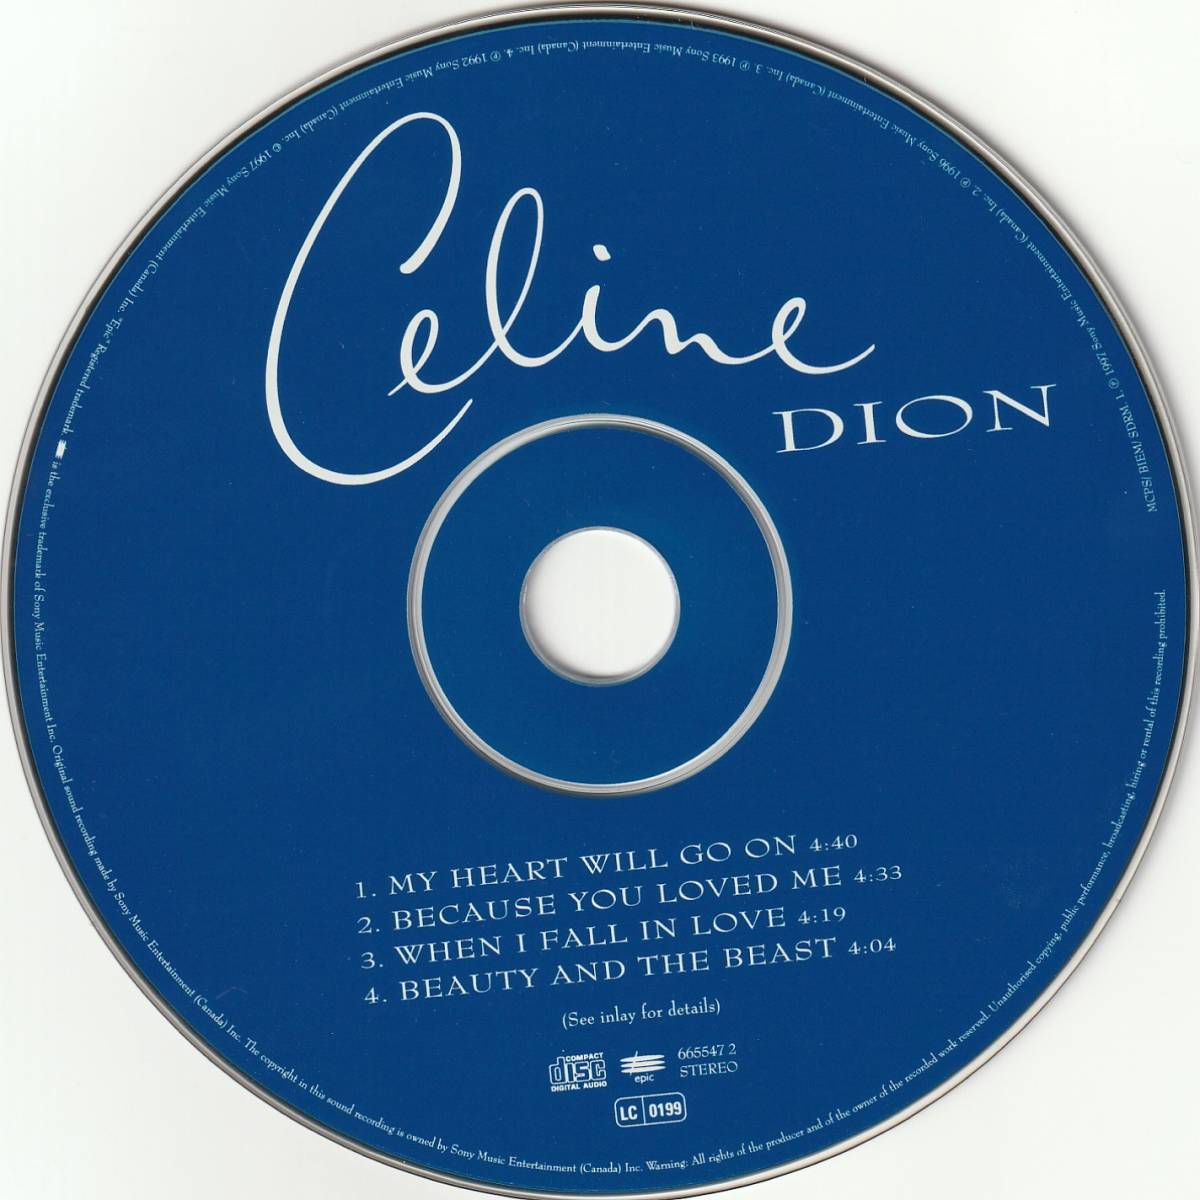 CELINE DION セリーヌ ディオン At The Movies EP 映画主題歌 4曲収録 Heart 美女と野獣 On Will My ：  Go タイタニック 爆買い！ CD